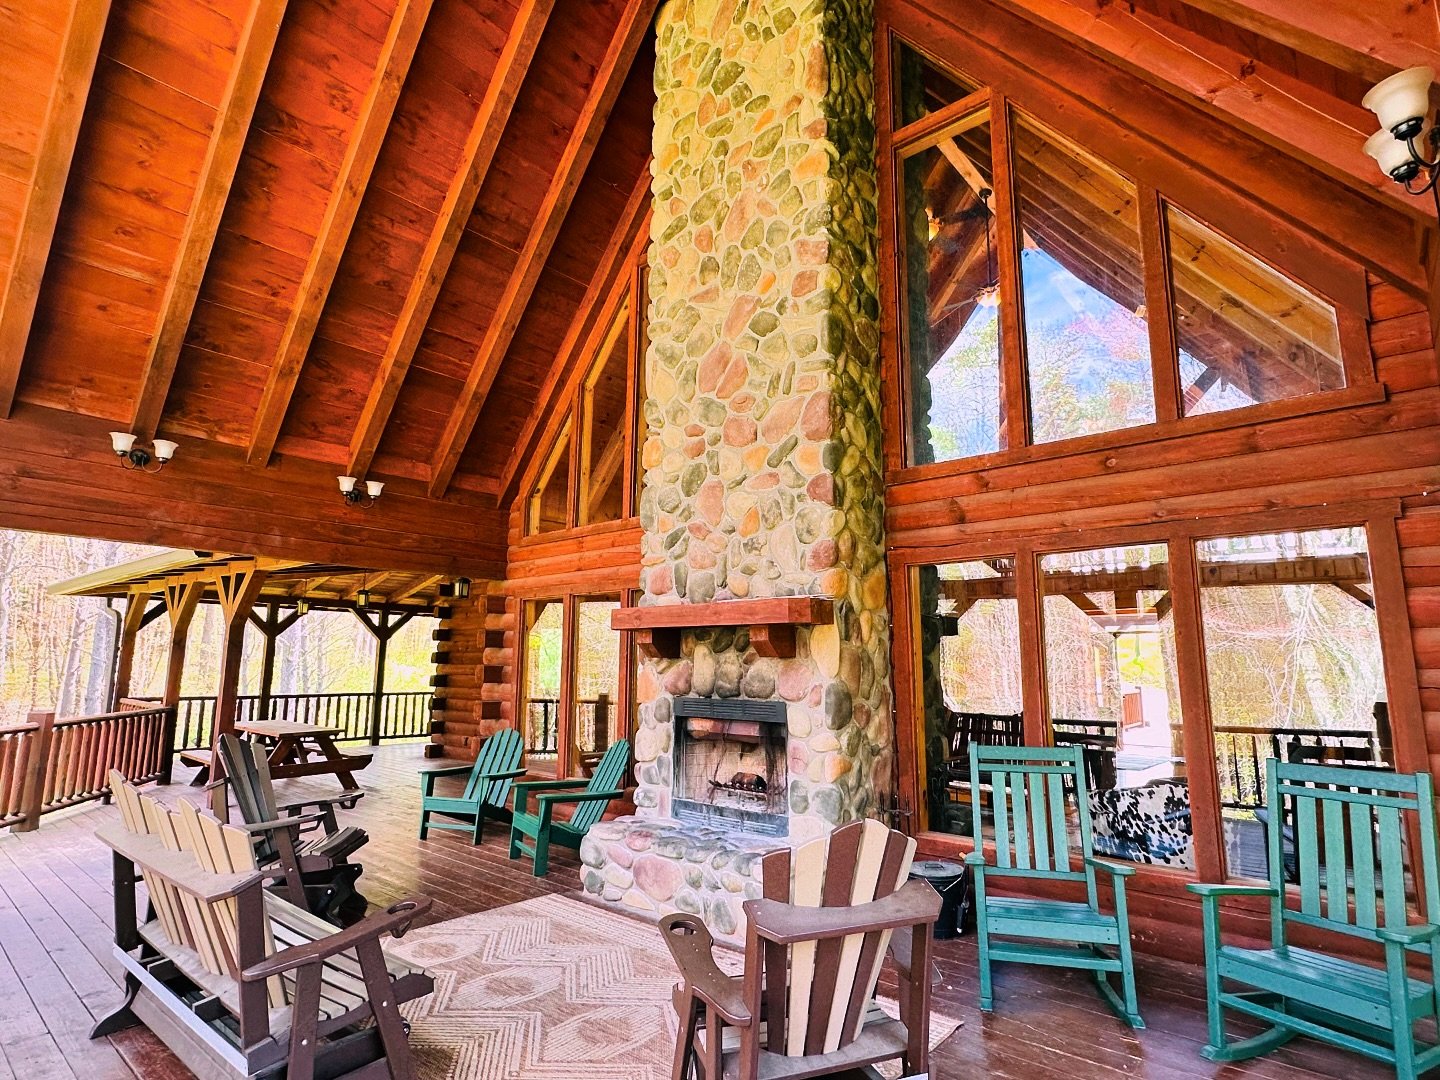 Lots of hours logged out here by our guests at River Rock! 

#outdoorliving #coveredporch #logcabin #cabin #vacationrentalsbyowner #vrbo #hockinghills #hockinghillsstatepark #ohio #fireplace